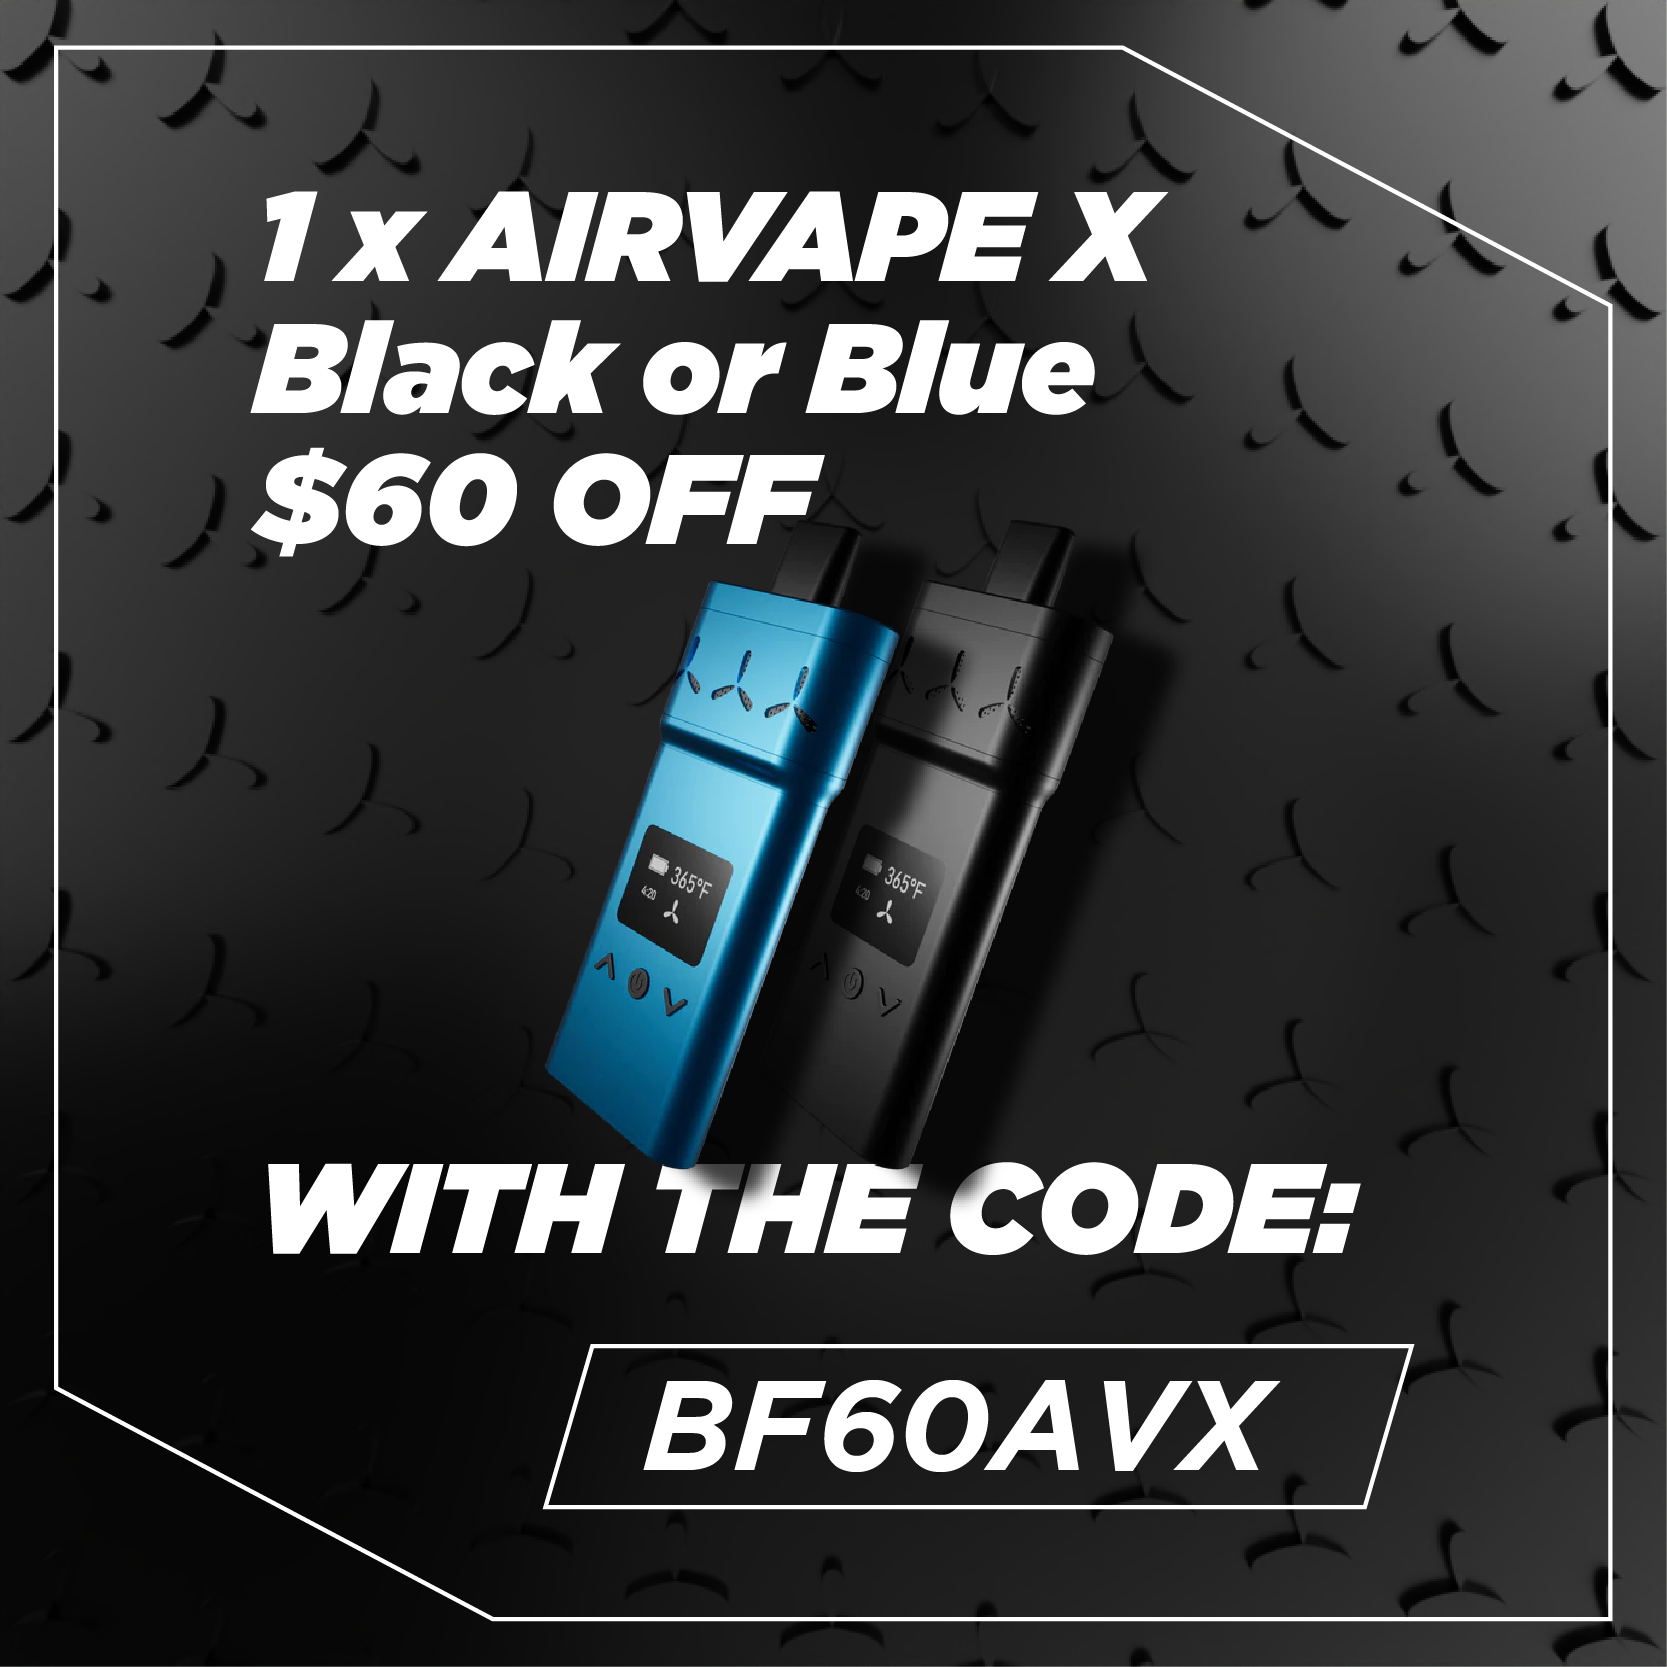 Get an Airvape X black or blue $60 OFF with the code BF60AVX